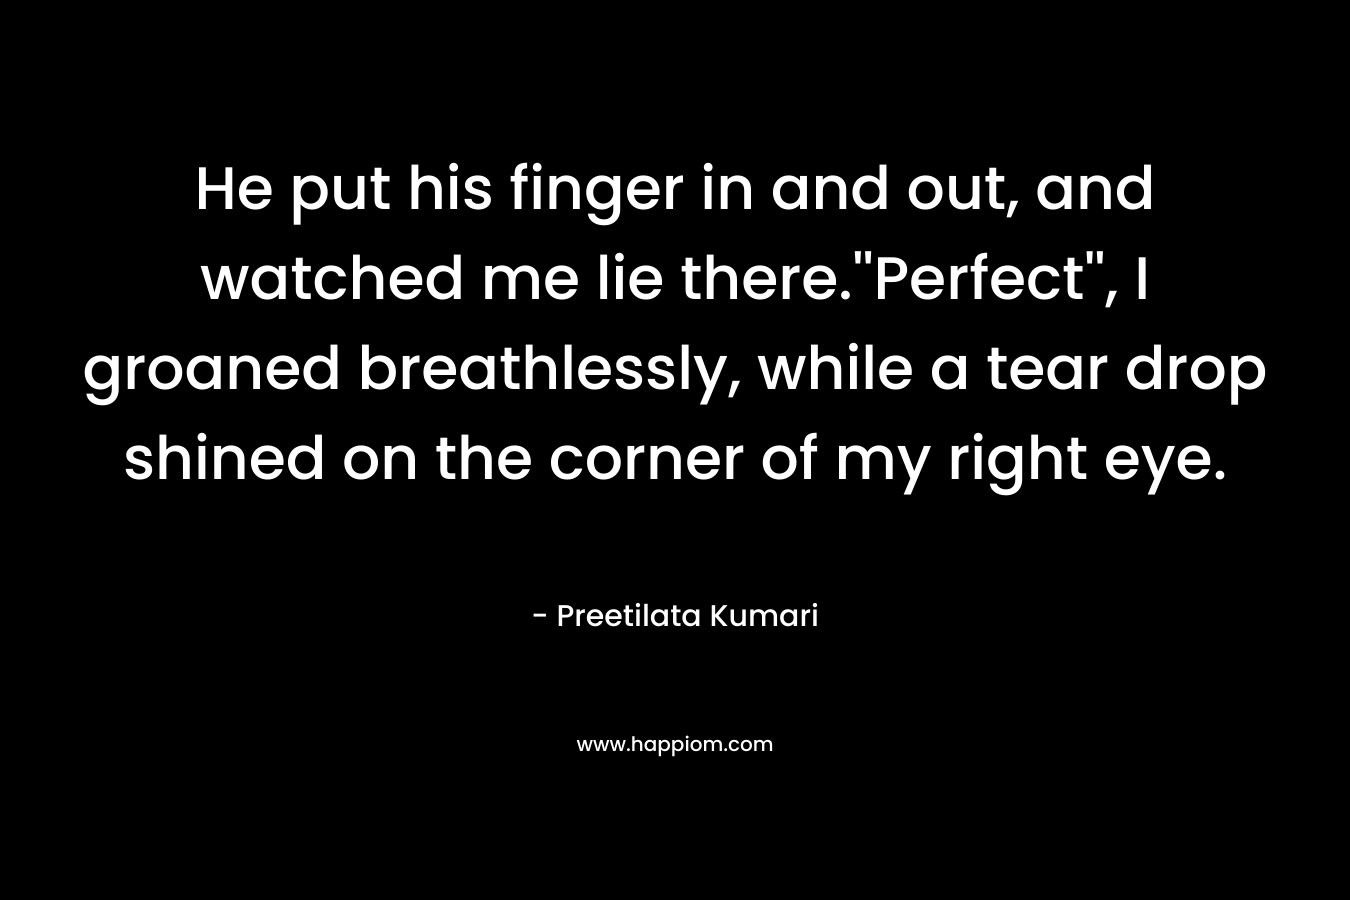 He put his finger in and out, and watched me lie there.”Perfect”, I groaned breathlessly, while a tear drop shined on the corner of my right eye. – Preetilata Kumari